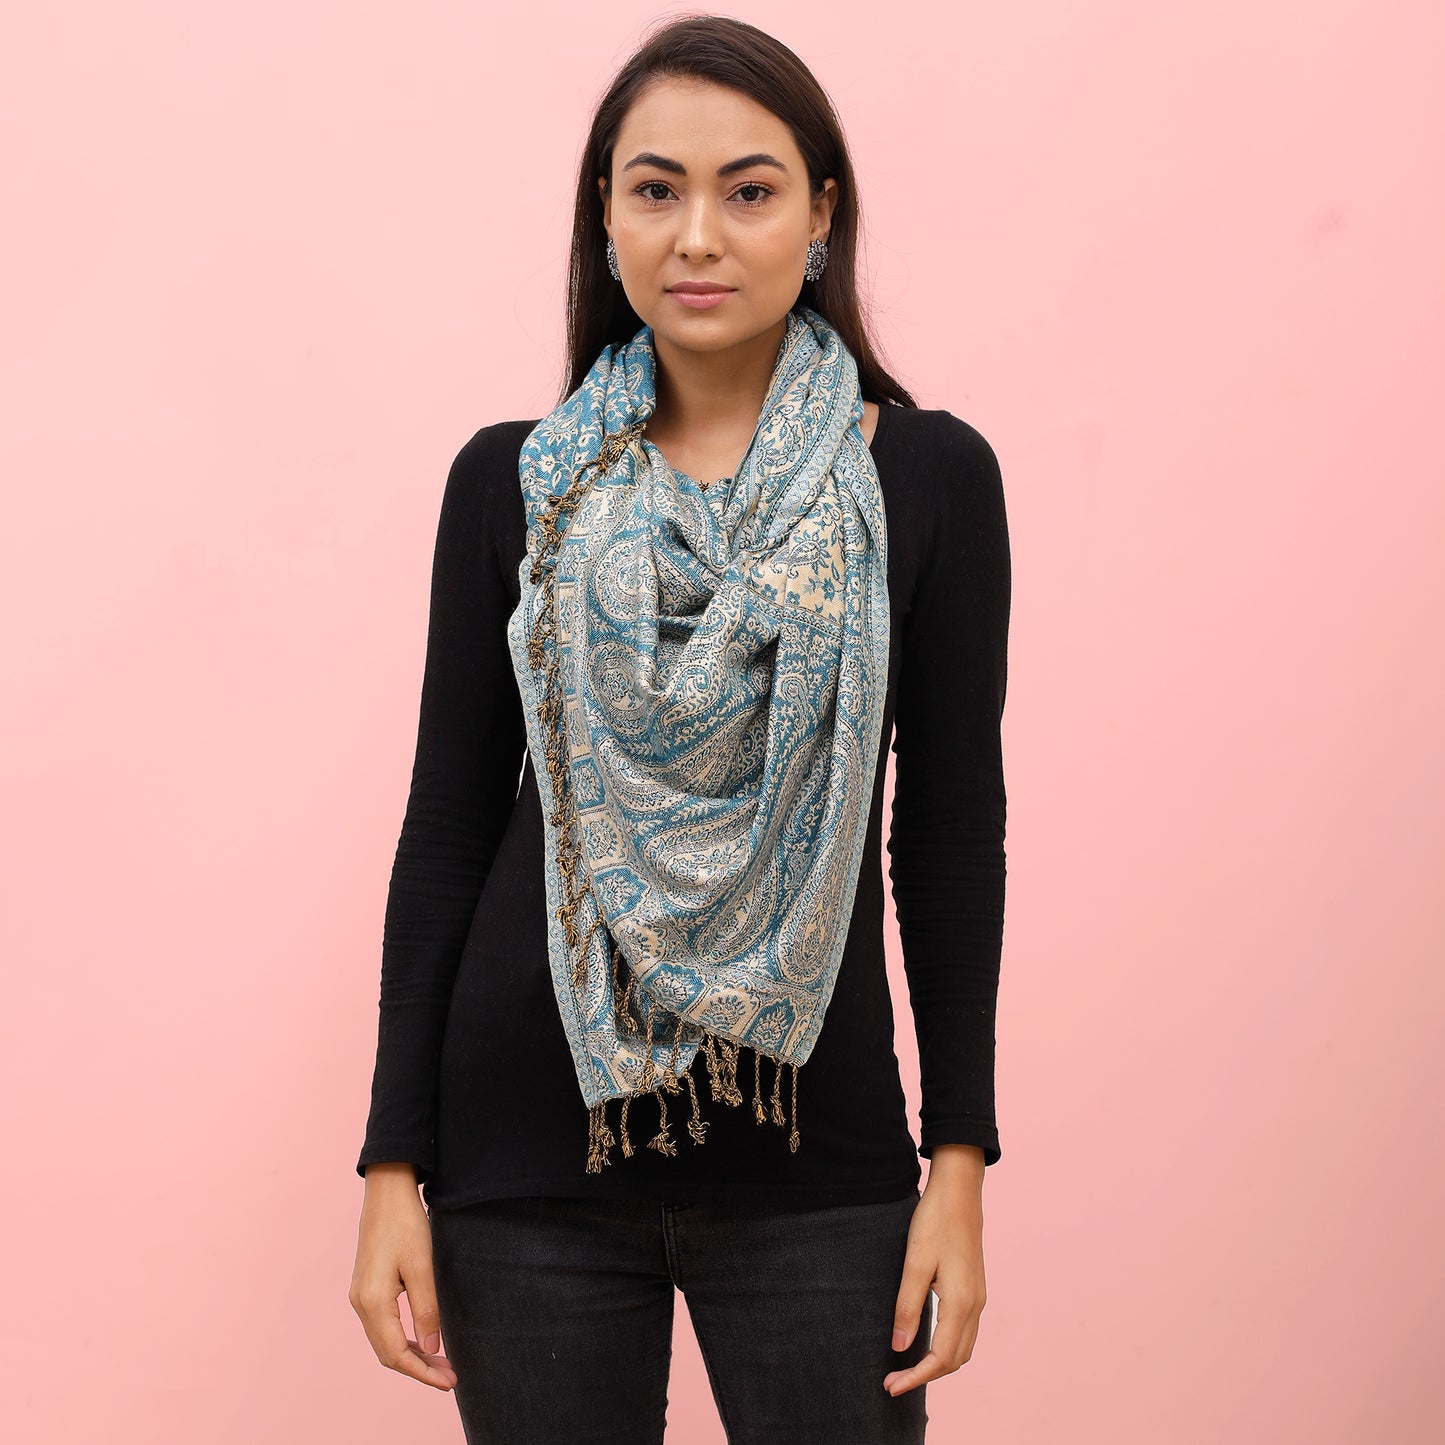 The Sultani Art Reversible Stole in Blue